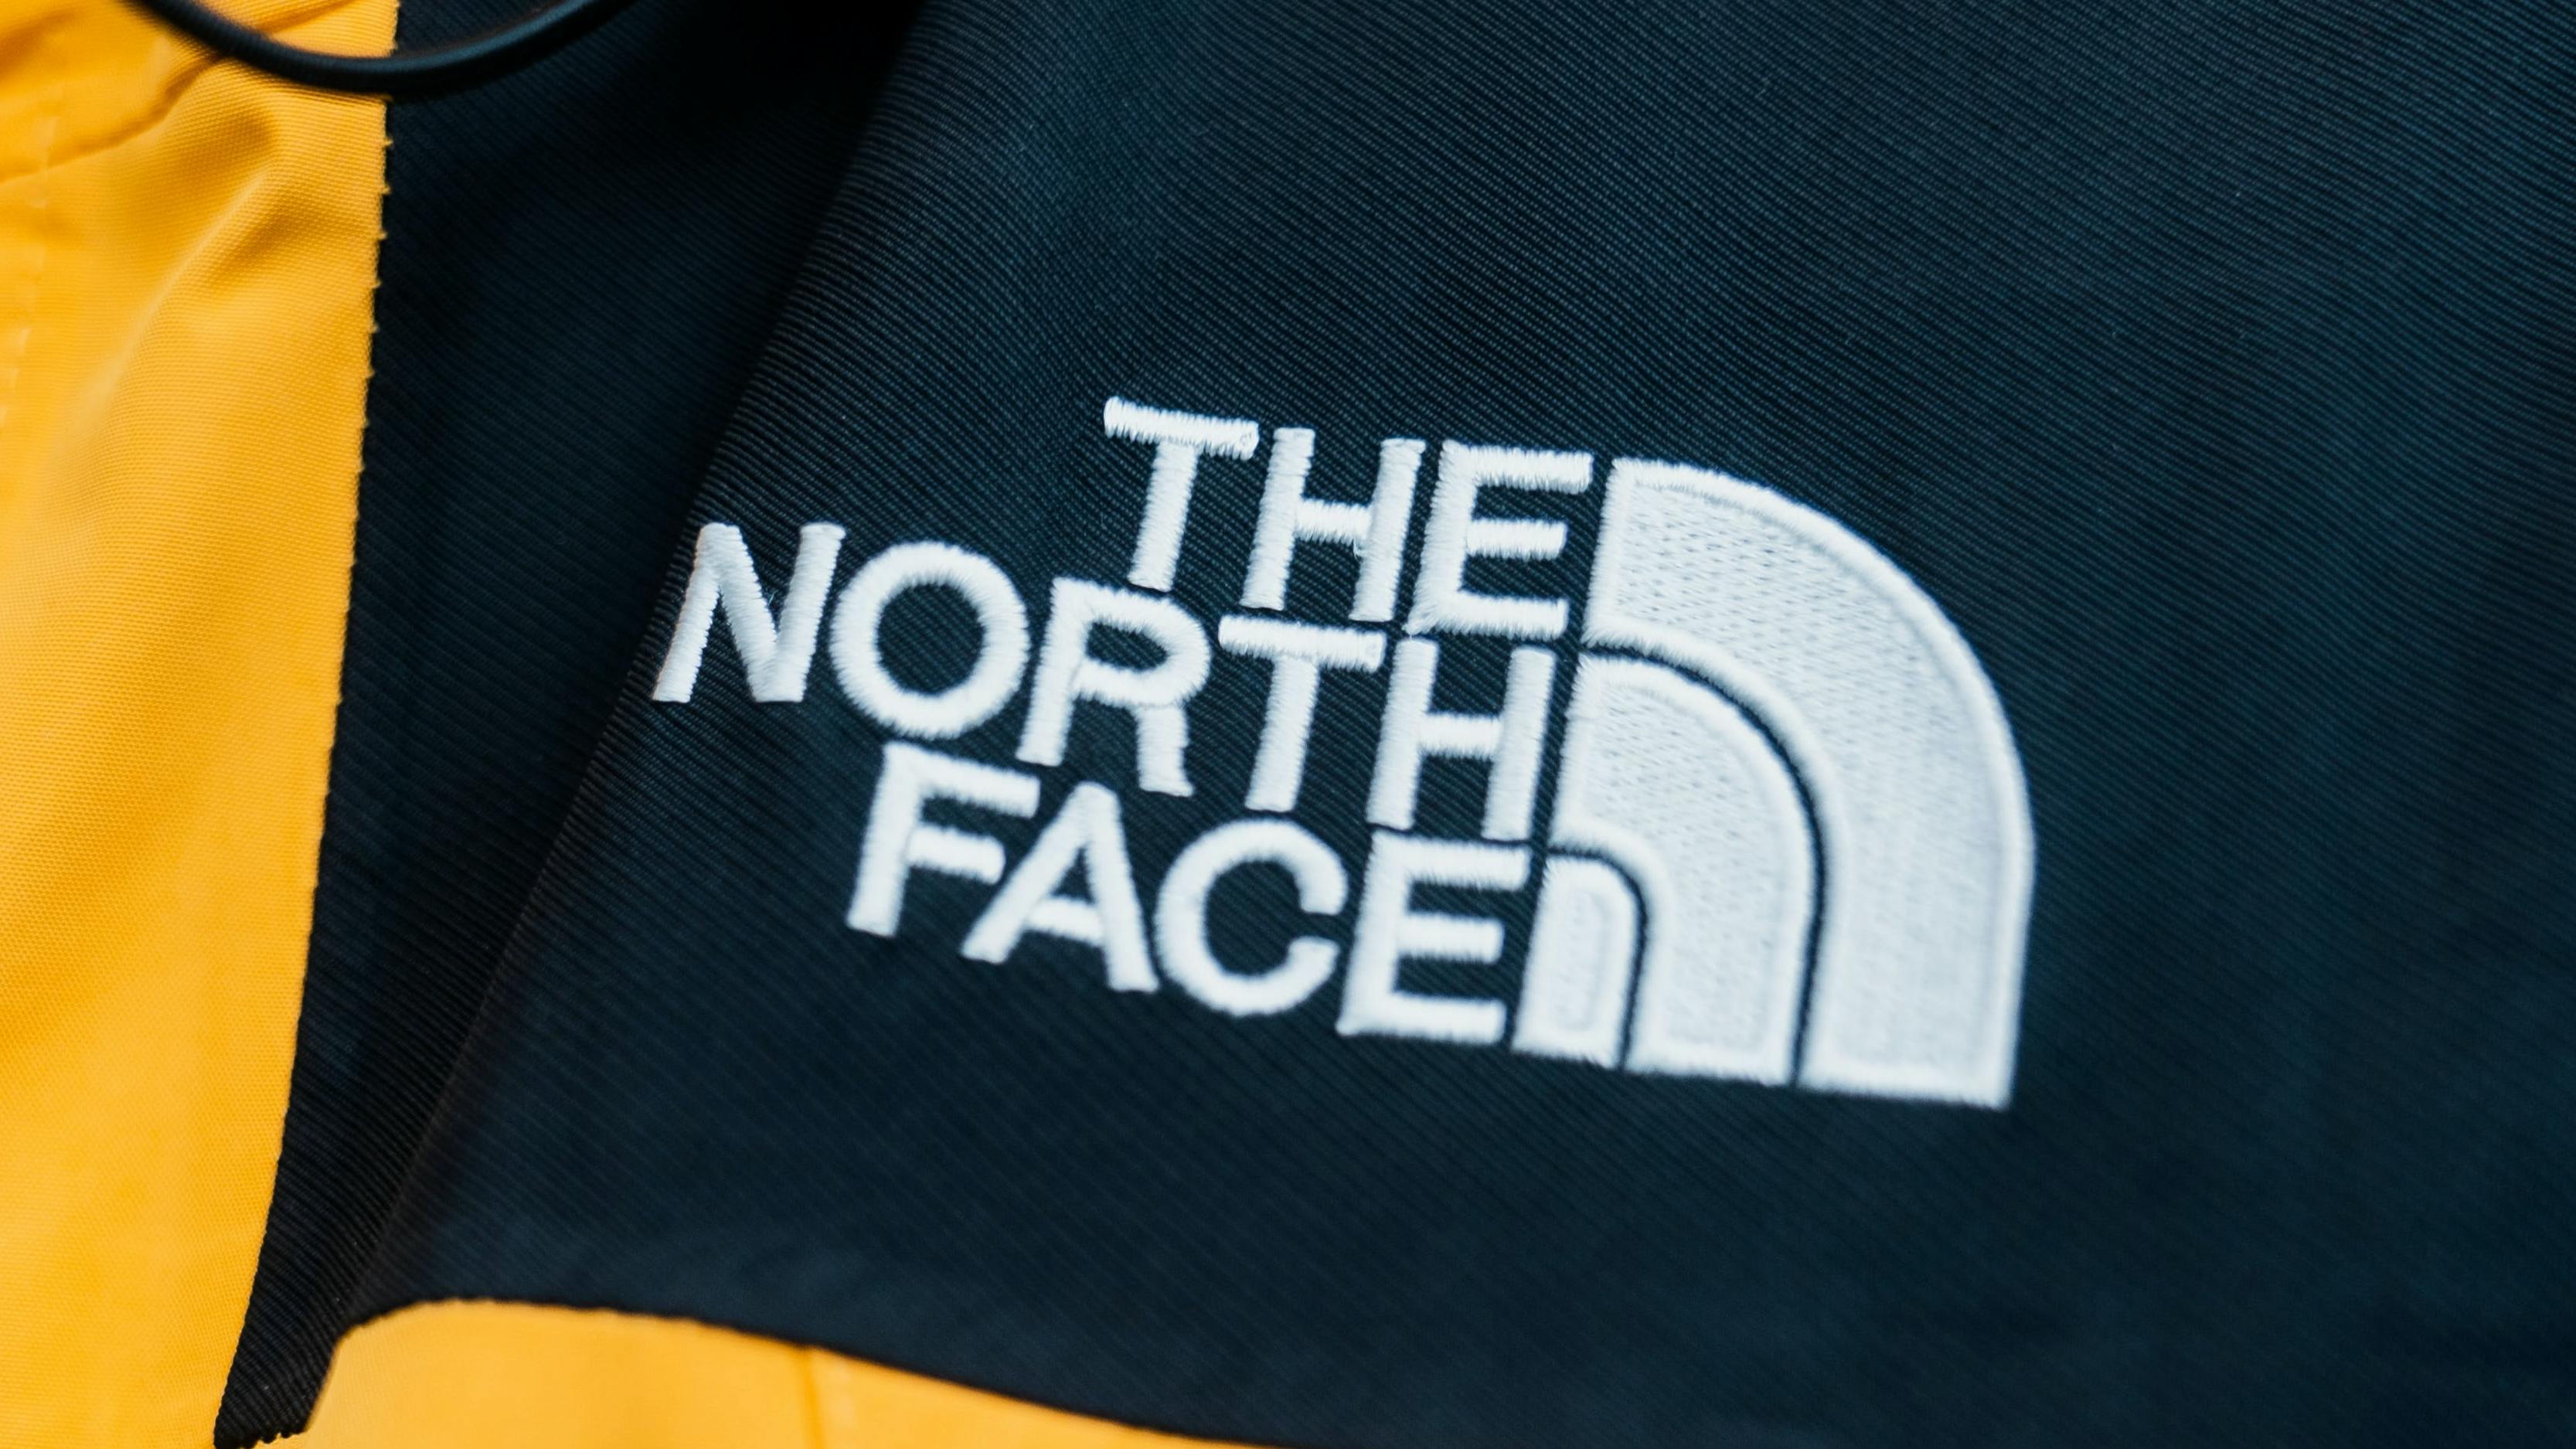 North Face jacket with logo.